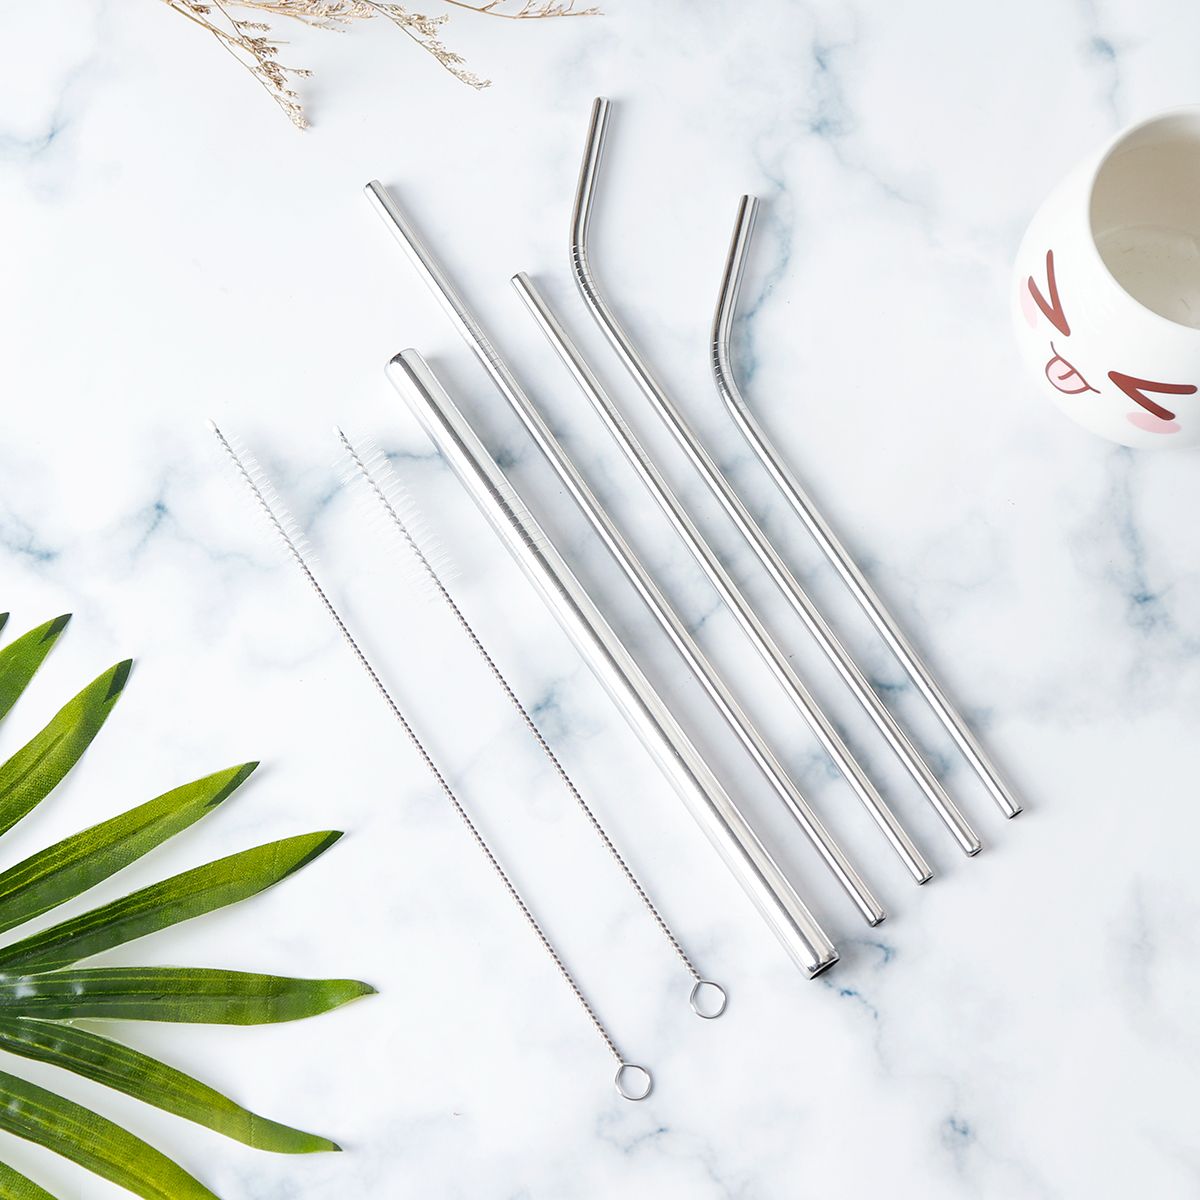 Portable-Metal-Straw-Set-304-Stainless-Steel-Straws-Reusable-Metal-Drinking-Straws-With-Cleaning-Bru-1532046